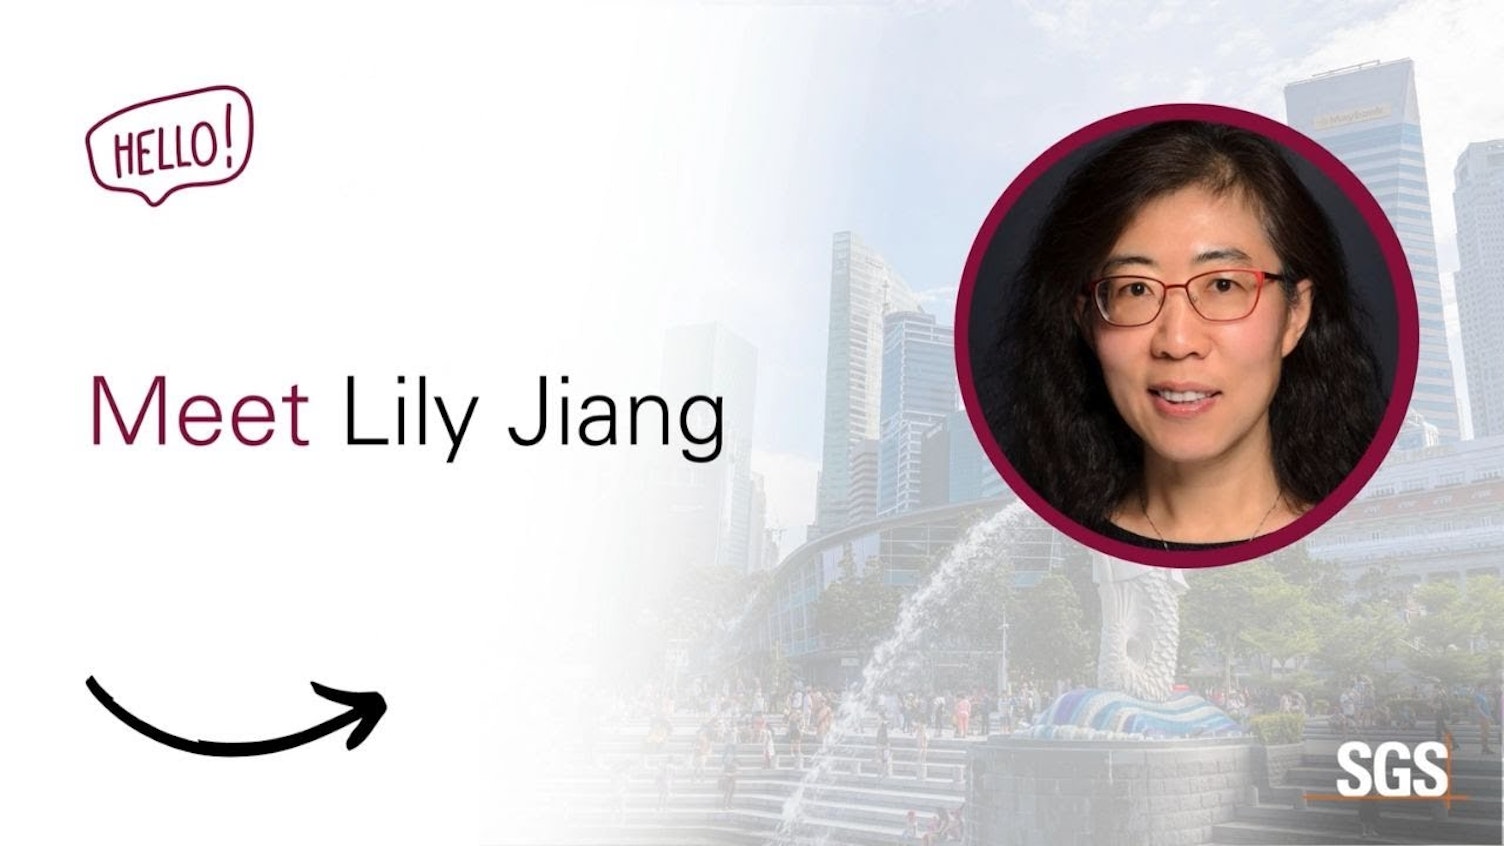 Meet our Cosmetics and Hygiene Expert, Lily Jiang!